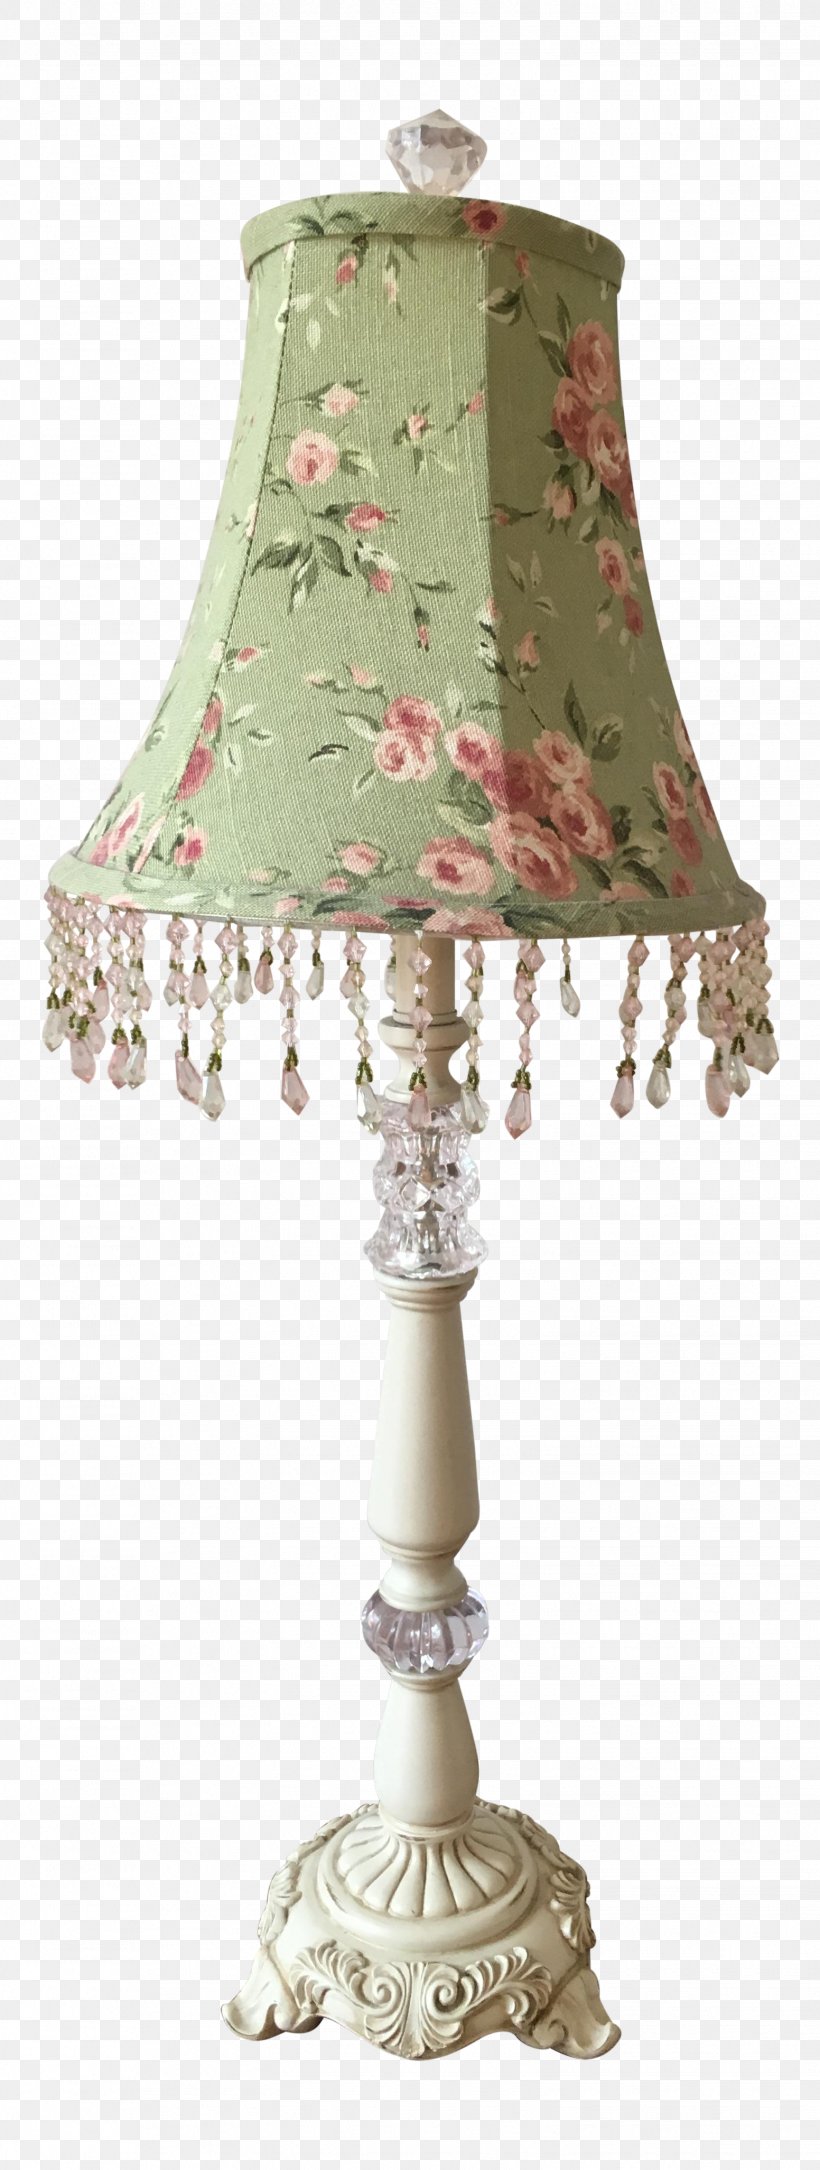 Lamp Shades, PNG, 1552x4108px, Lamp Shades, Lamp, Lampshade, Light Fixture, Lighting Download Free